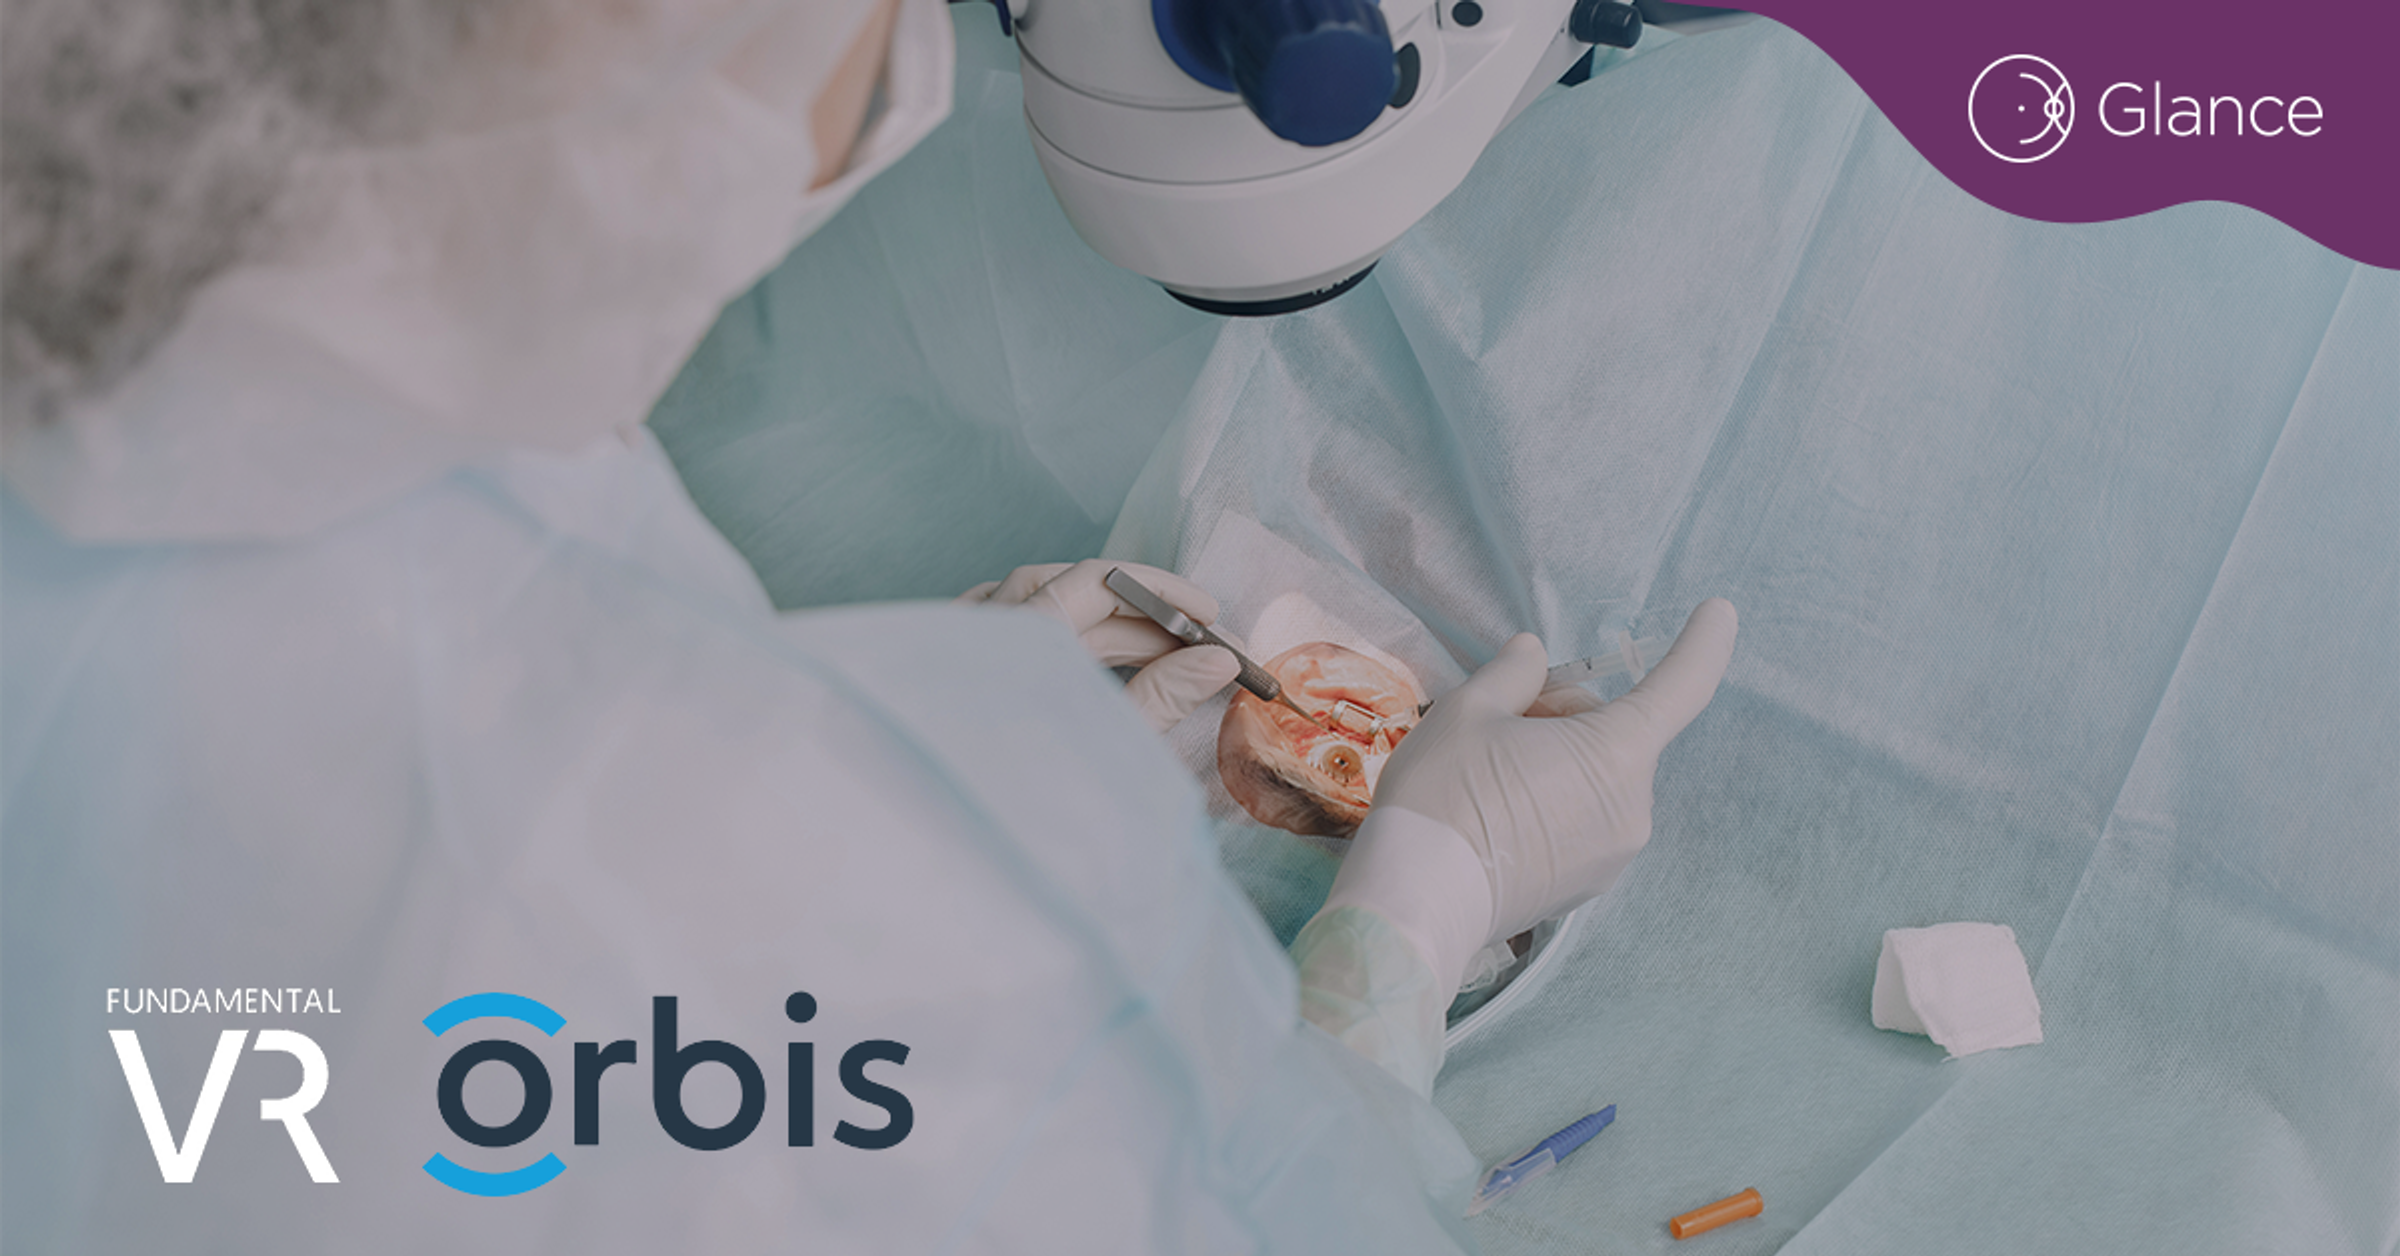 Orbis and FundamentalVR roll out VR cataract surgery training